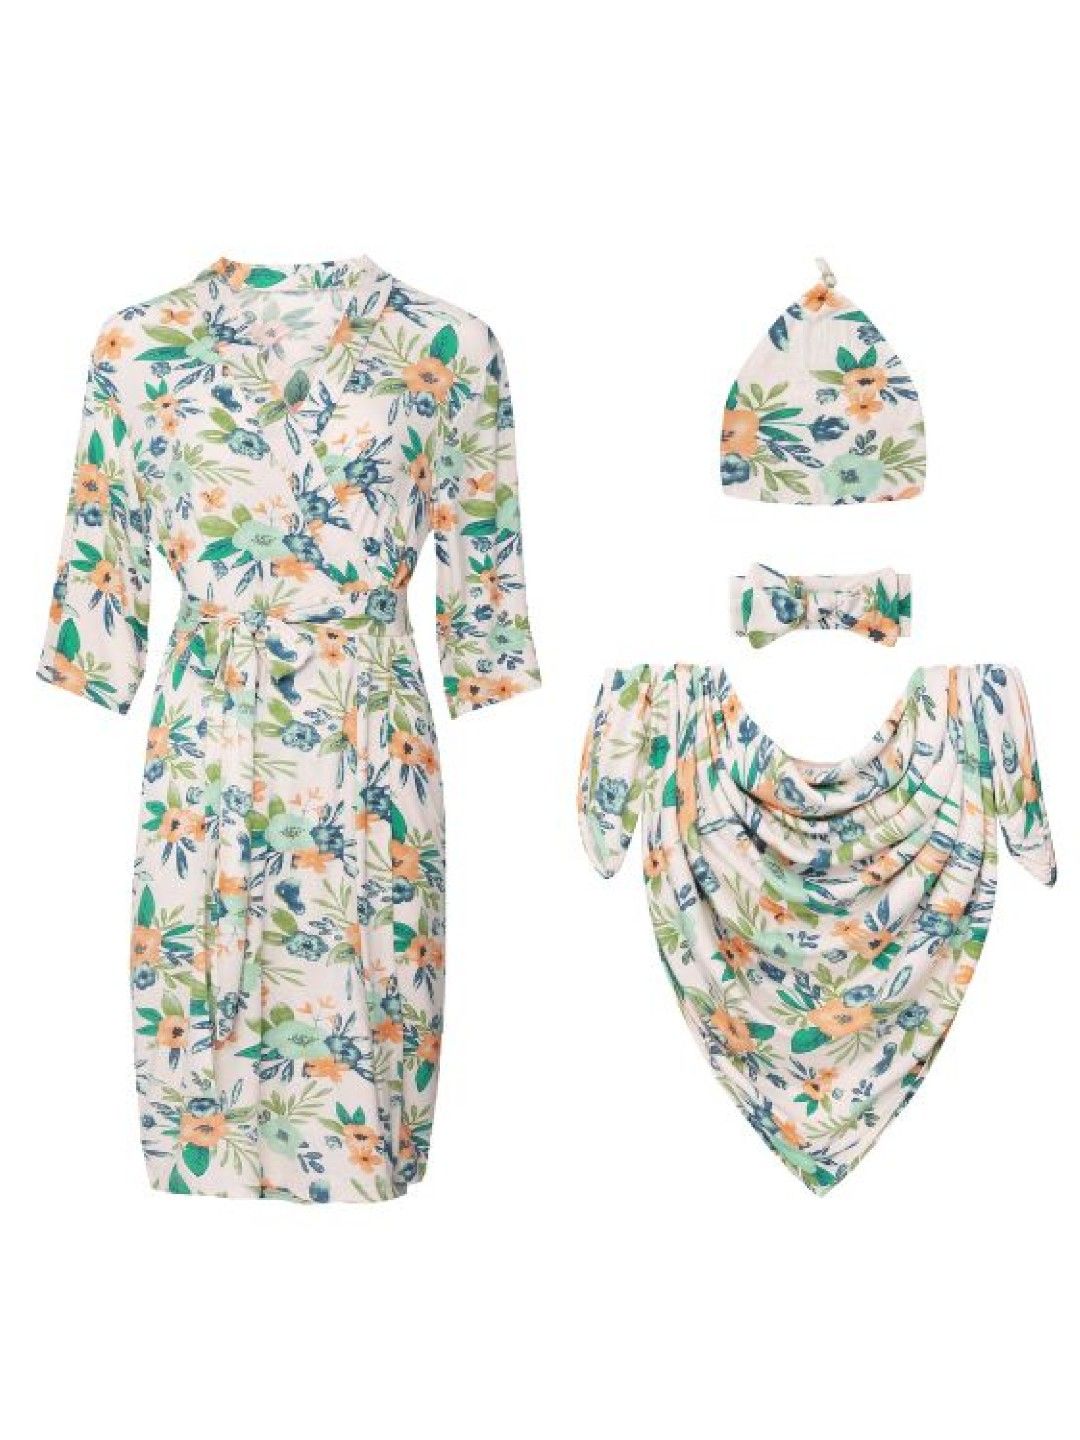 Mamei Hospital Labor Delivery Maternity Mom Robe and Baby Swaddle Set